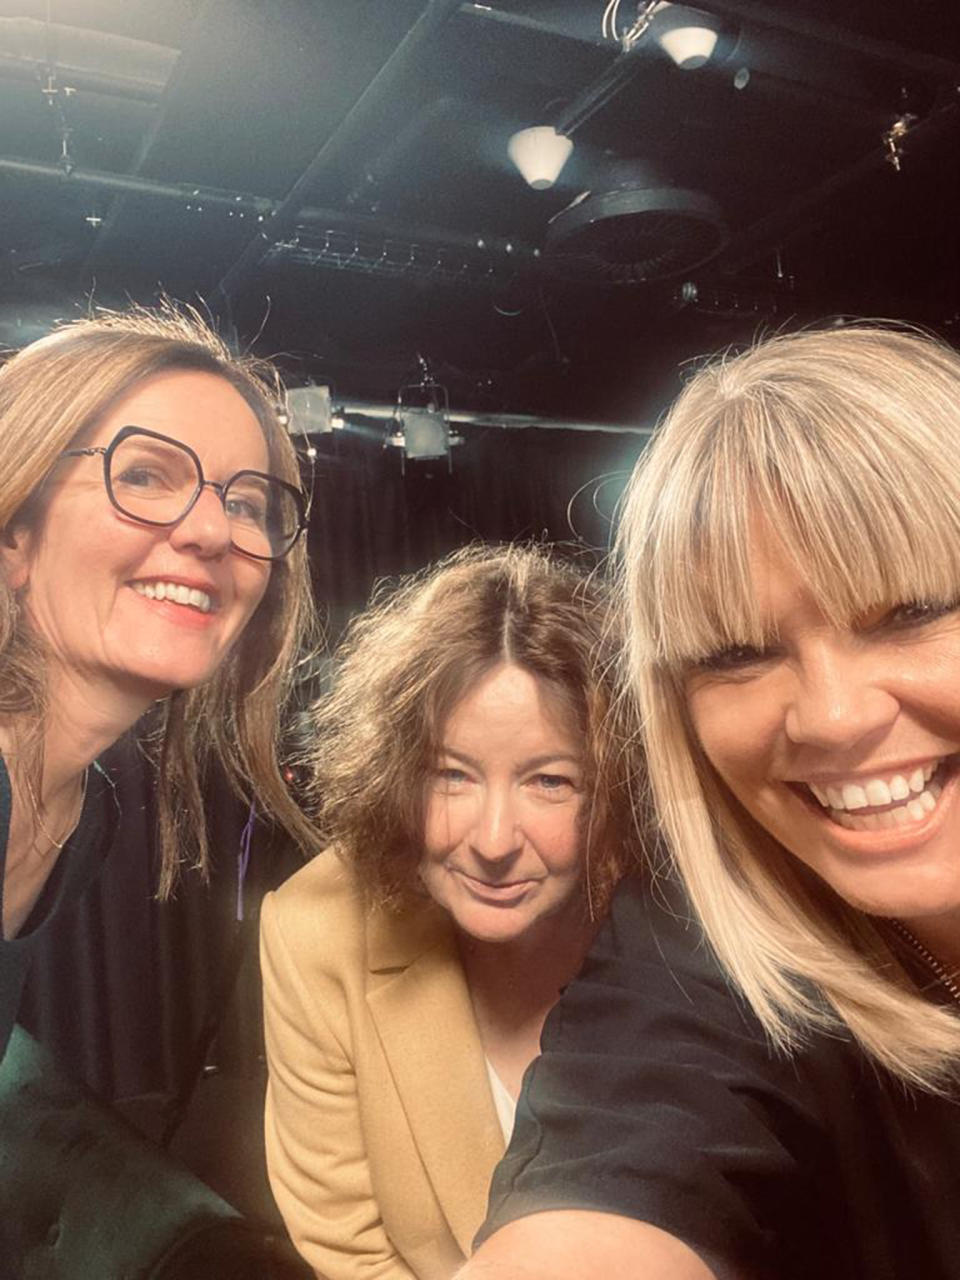 Kate Thornton takes a selfie with White Wine Question Time guests Jane Garvey and Fi Glover. (White Wine Question Time)